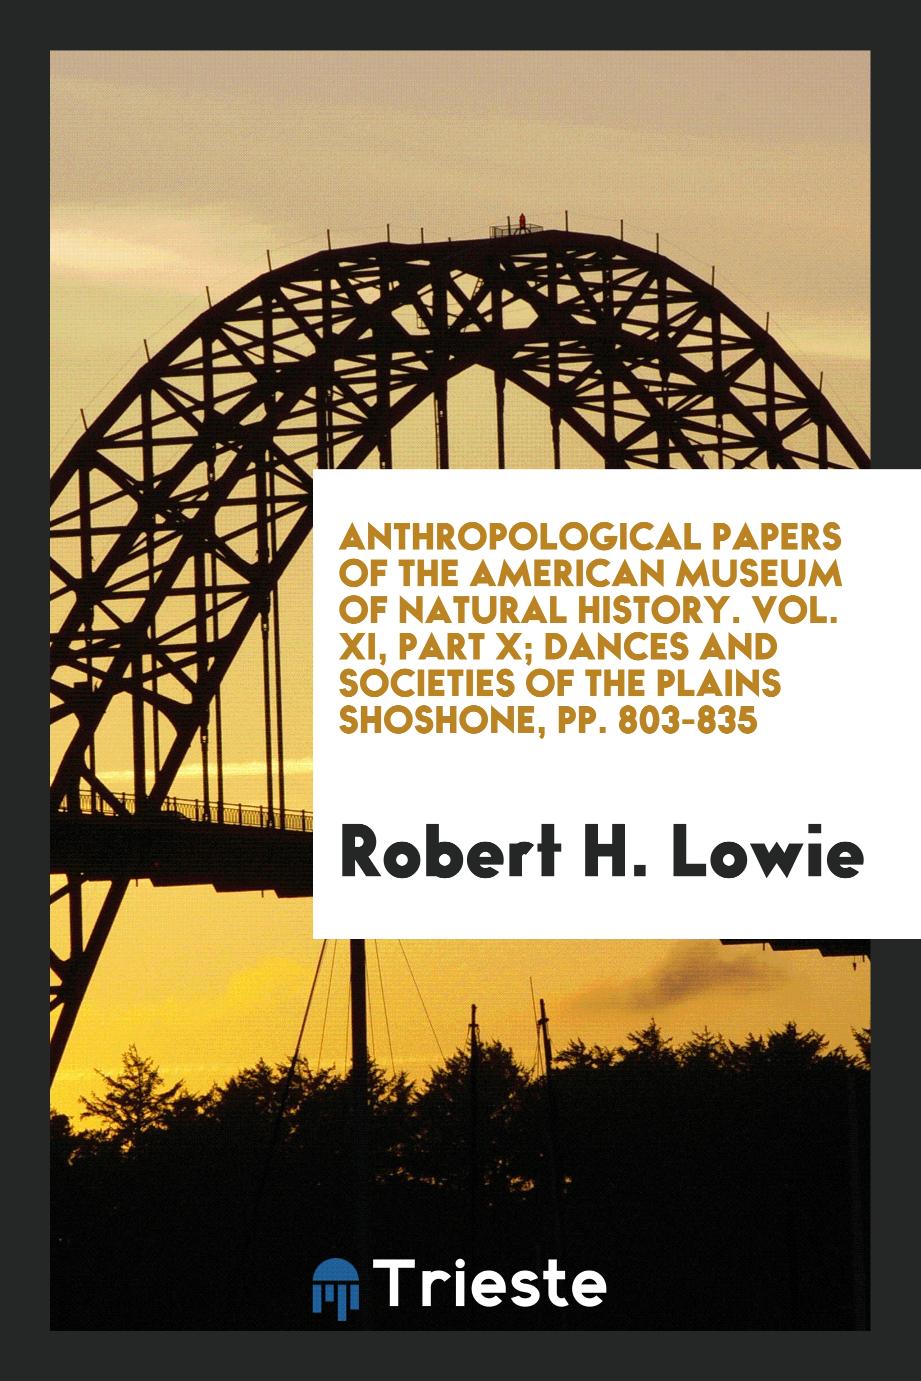 Robert H. Lowie - Anthropological Papers of the American Museum of Natural History. Vol. XI, Part X; Dances and societies of the Plains Shoshone, pp. 803-835